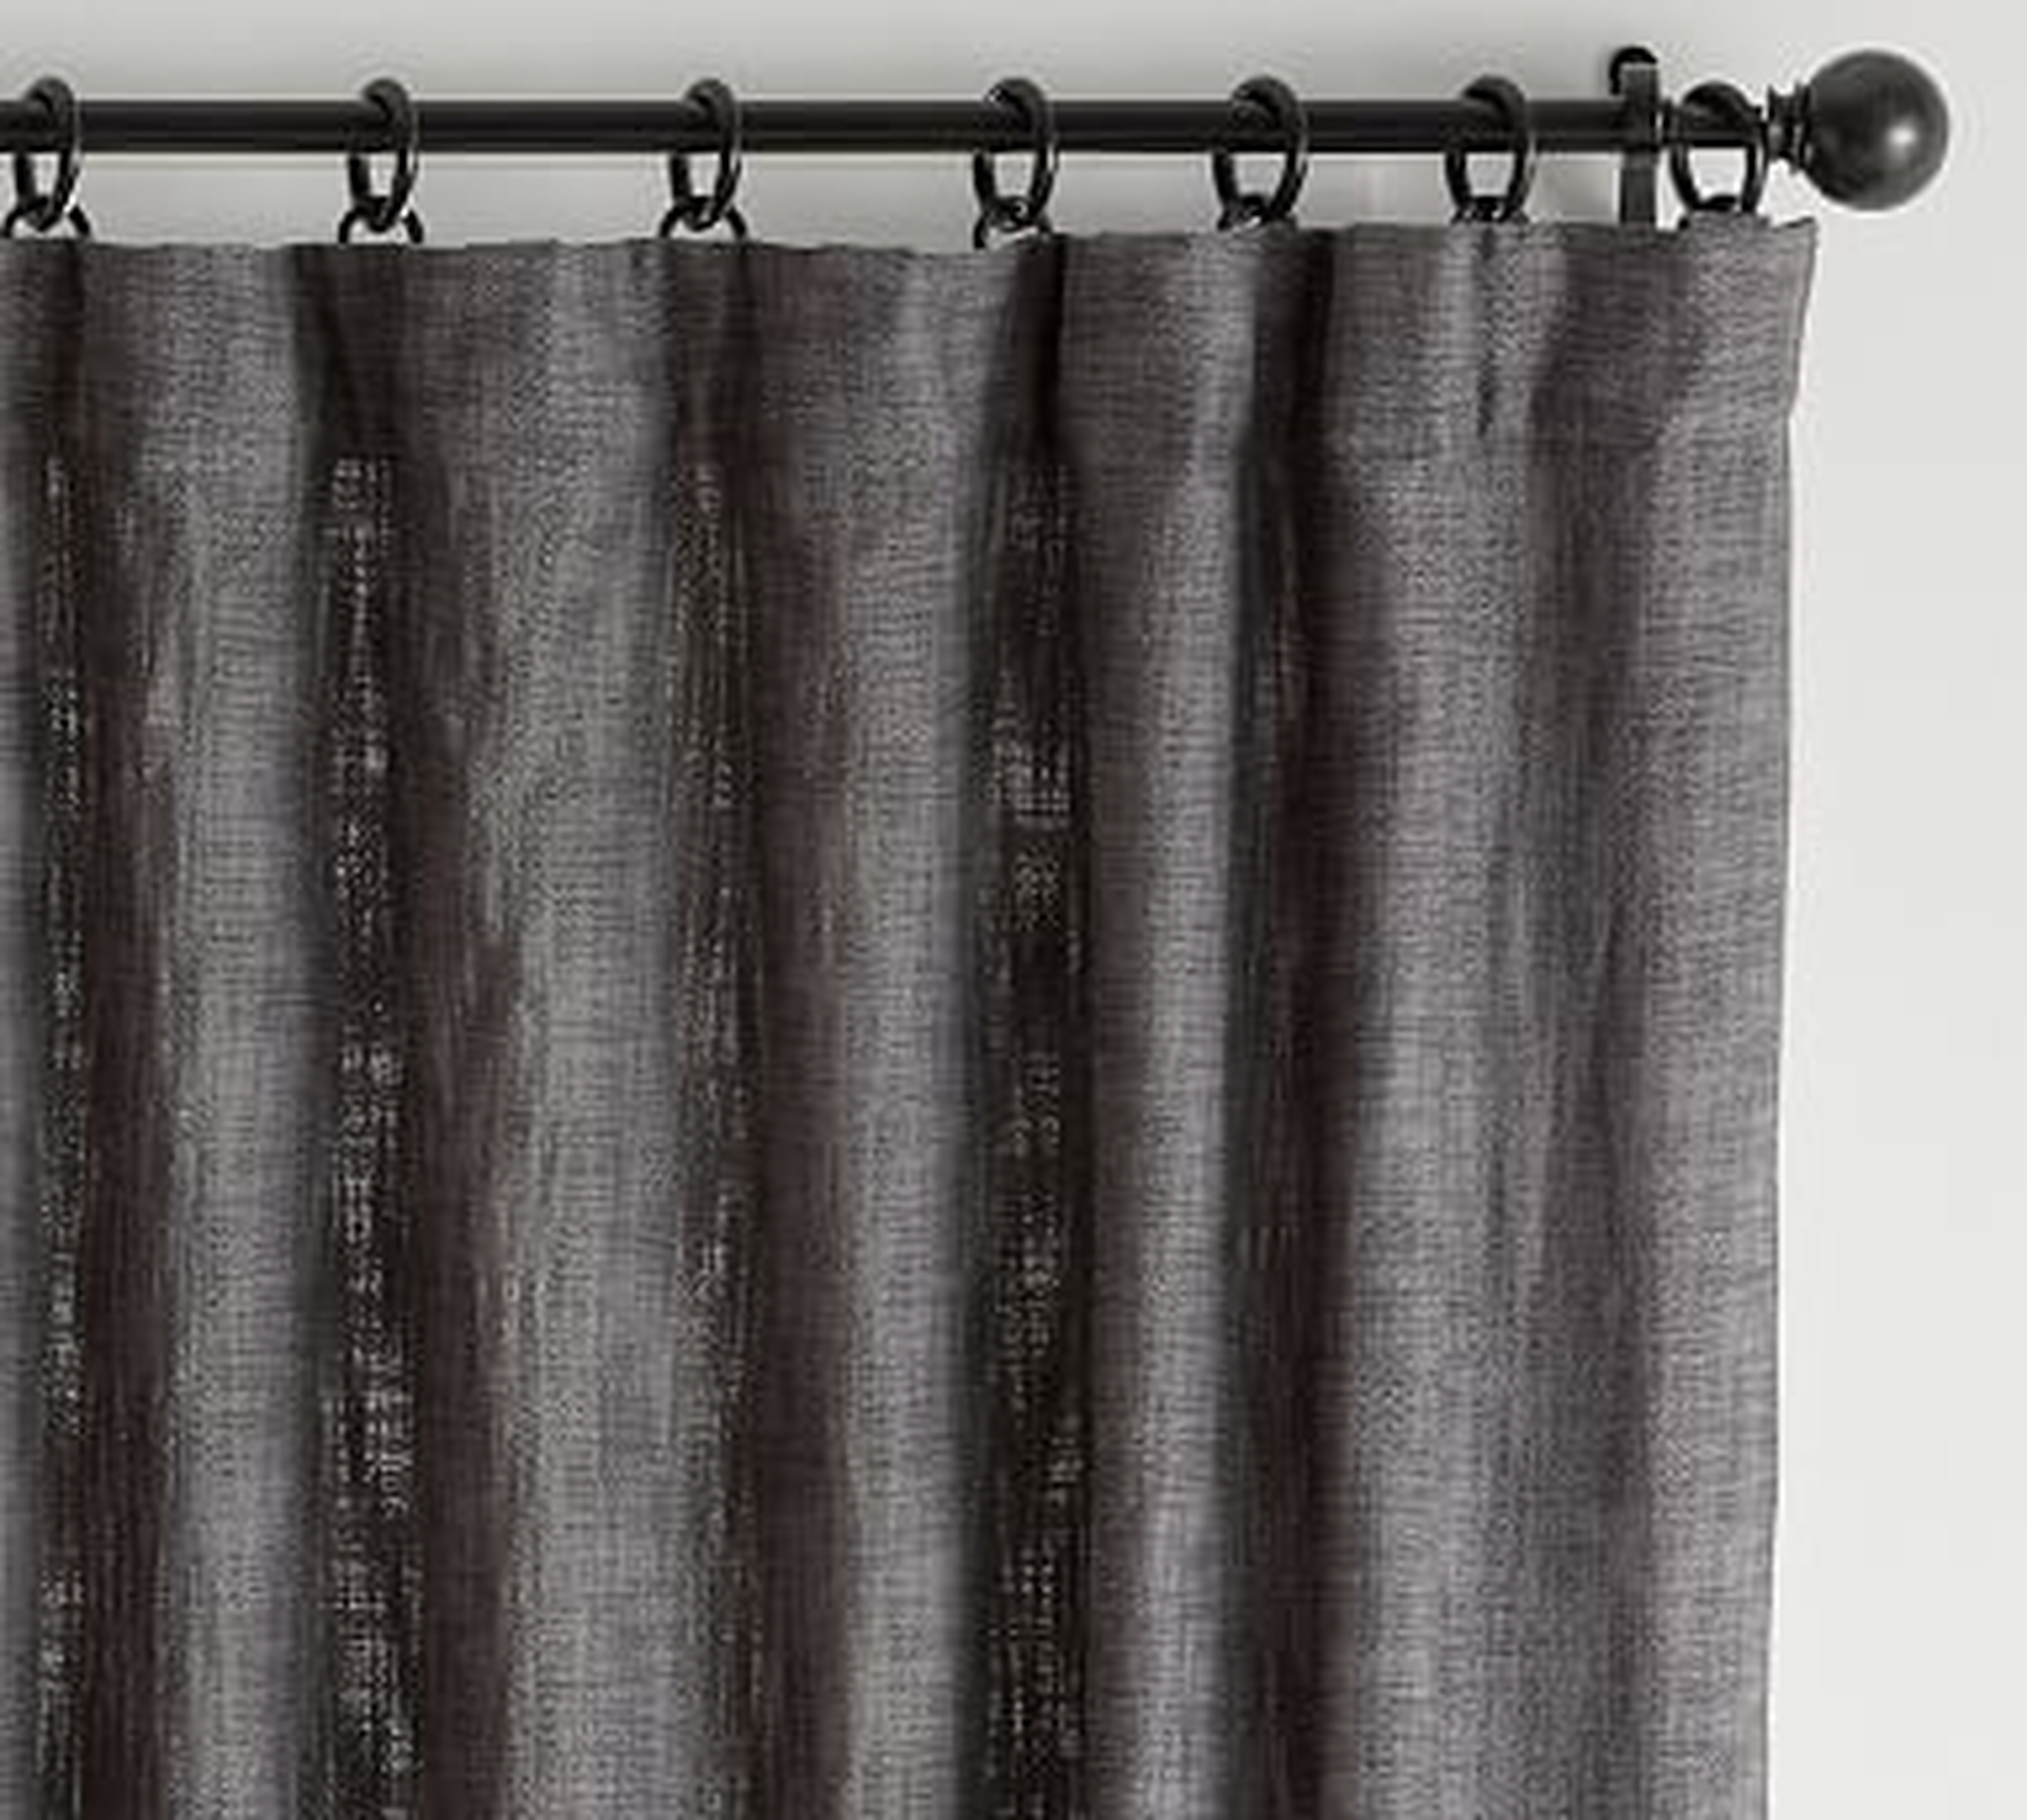 Seaton Textured Curtain, 50 x 96", Charcoal - Pottery Barn